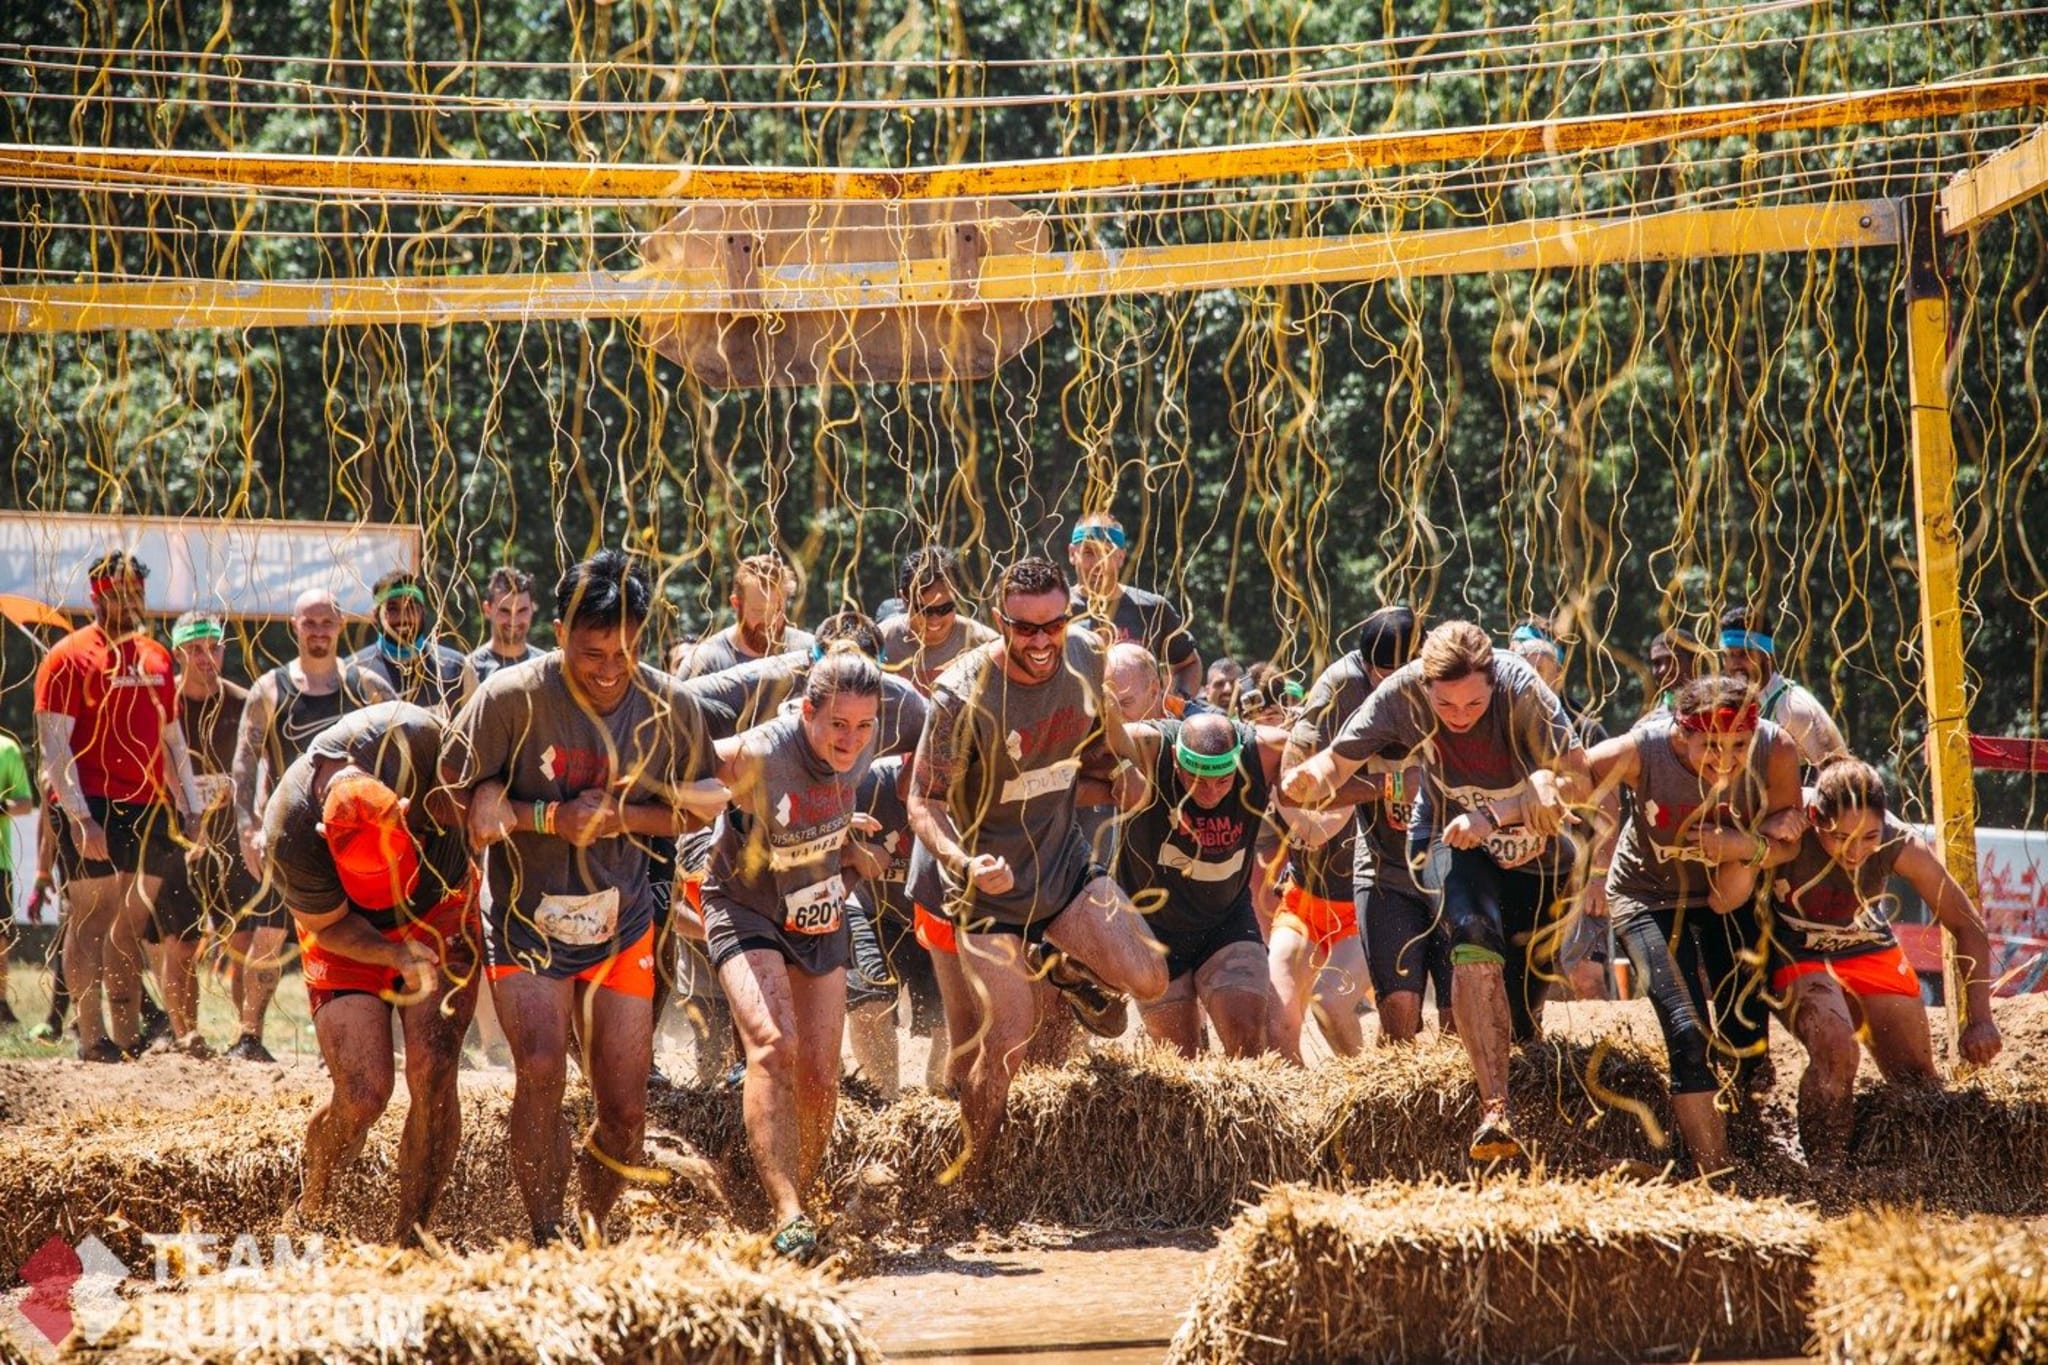 Tough Mudder Yorkshire 2019 — Sat 27 Jul — Book Now at Let's Do This